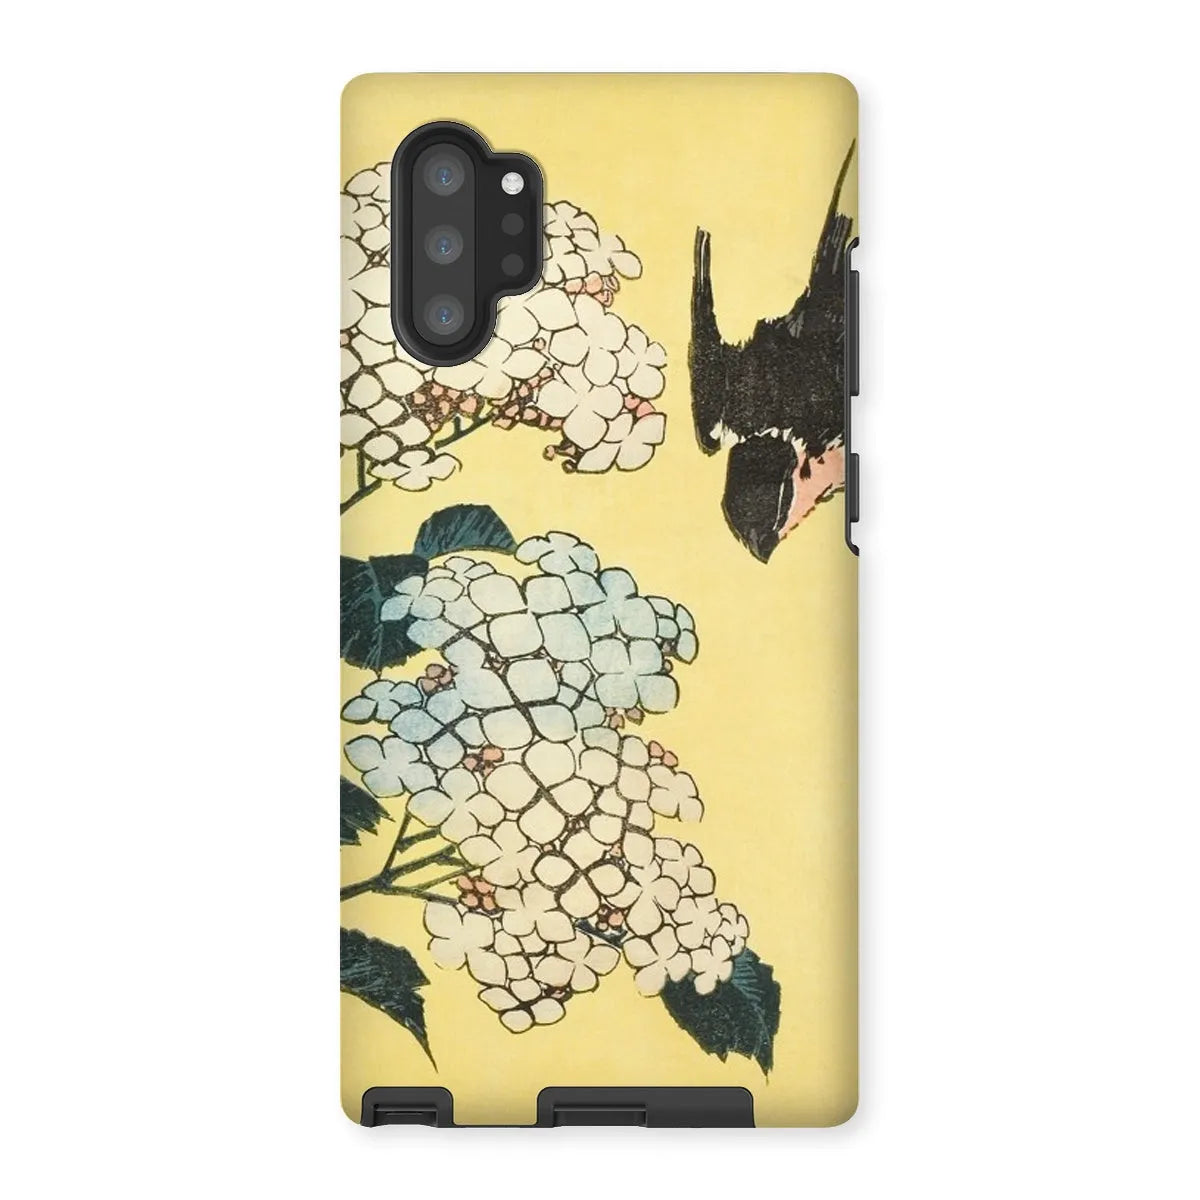 Hydrangea And Swallow - Japanese Art Phone Case - Hokusai - Samsung Galaxy Note 10p / Matte - Mobile Phone Cases